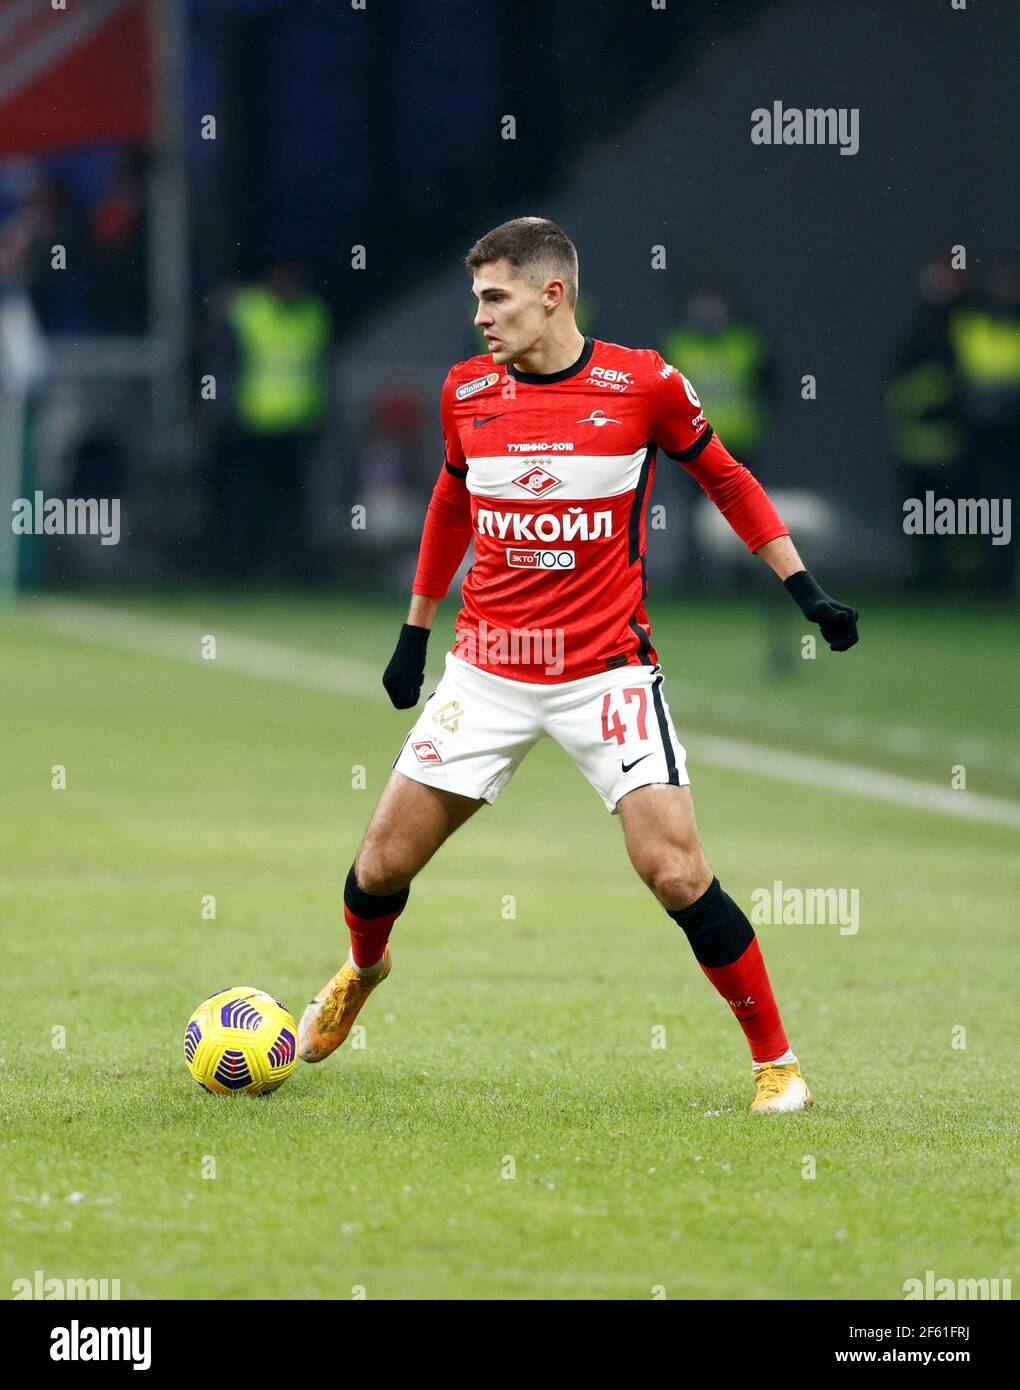 MOSCOW, RUSSIA, MARCH 13, 2021. The 2020/21 Russian Football Premier  League. Round 22. Football match between Dinamo (Moscow) vs Spartak (Moscow)  at VTB Arena. Photo by Stupnikov Alexander/FC Spartak Stock Photo - Alamy